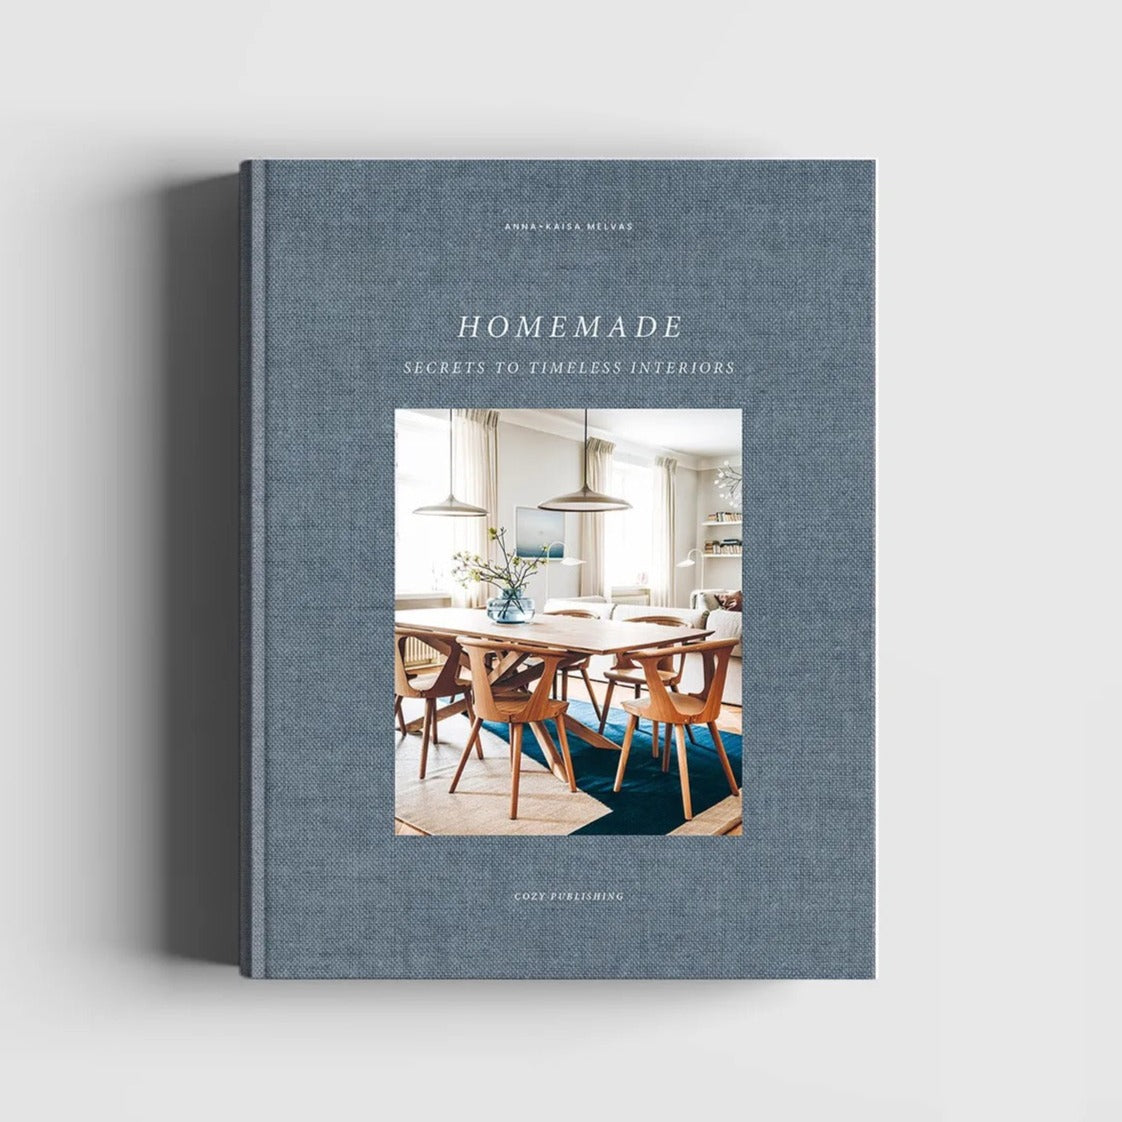 "Homemade: Secrets to Timeless Interiors" Coffee table book